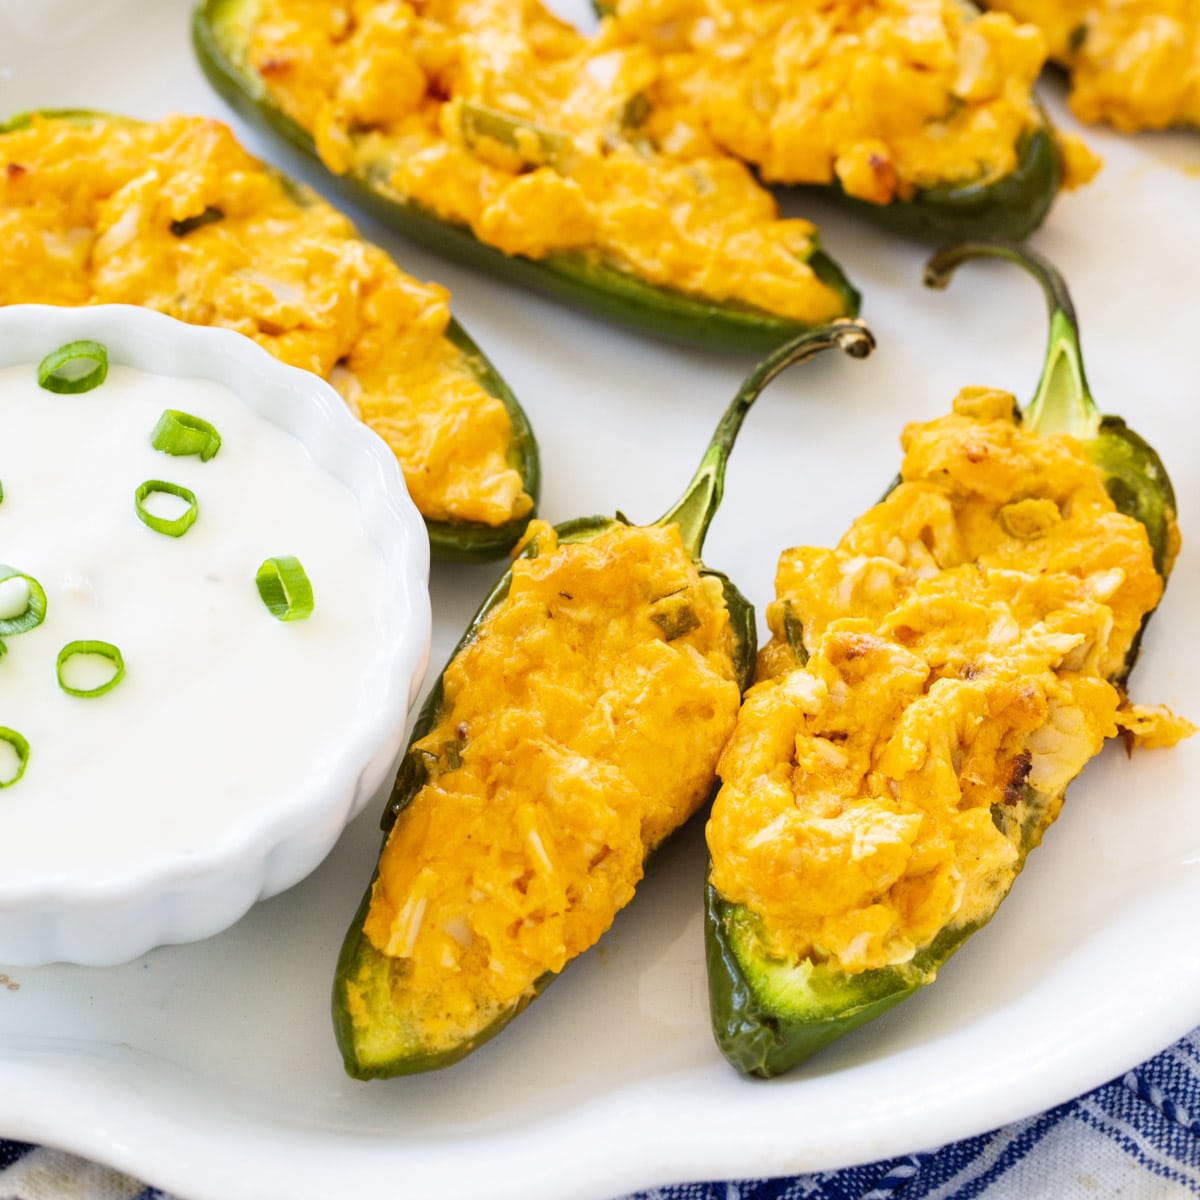 Buffalo Chicken Jalapeno Poppers on plate with bowl of blue cheese dip.